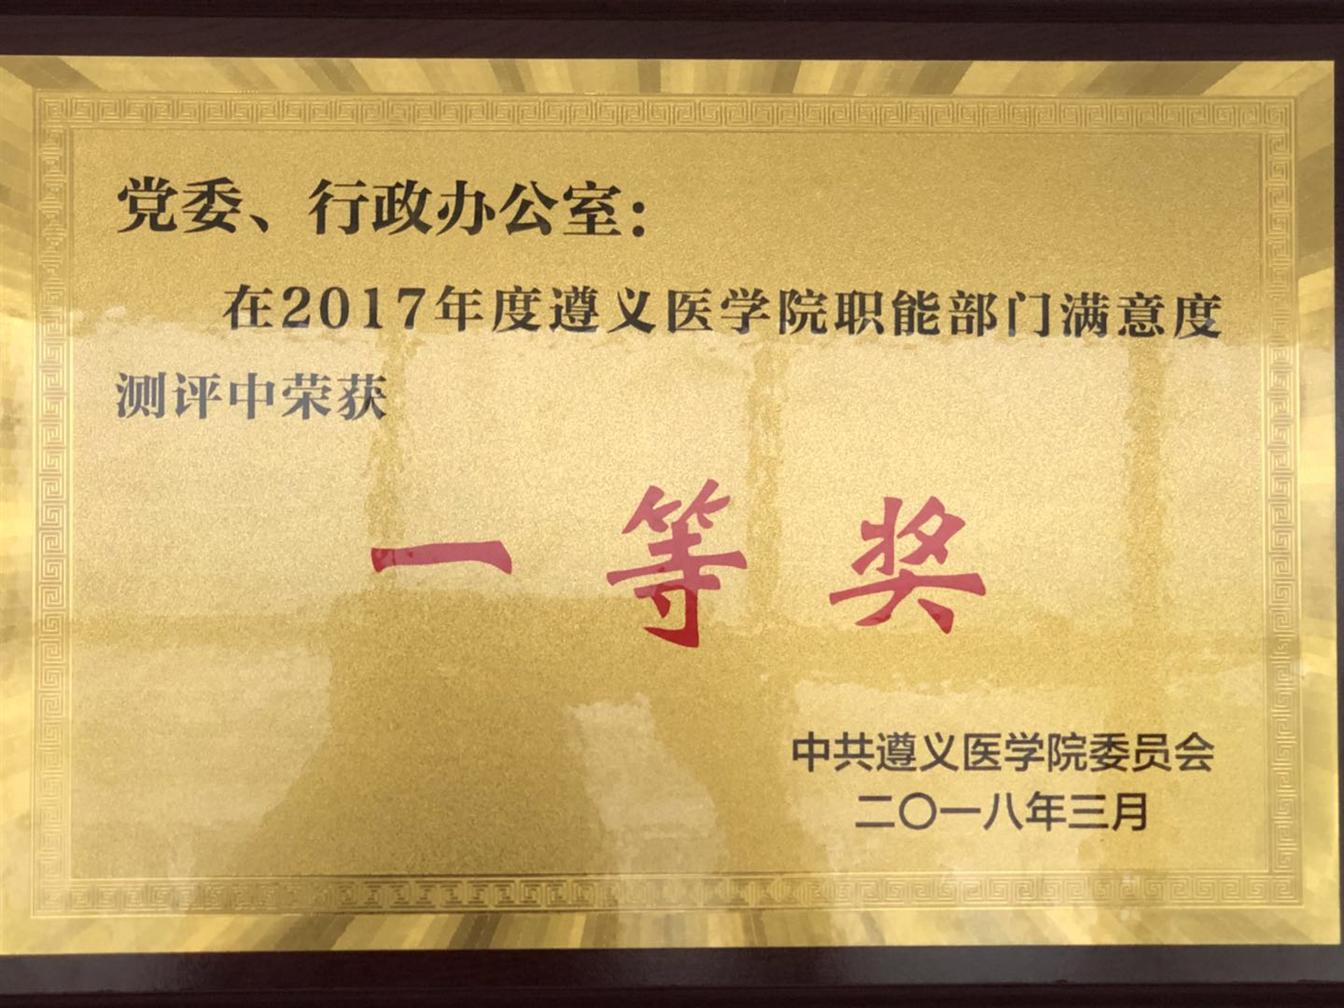 Government-party office won the first prize of functional departments satisfaction evaluation in 2017